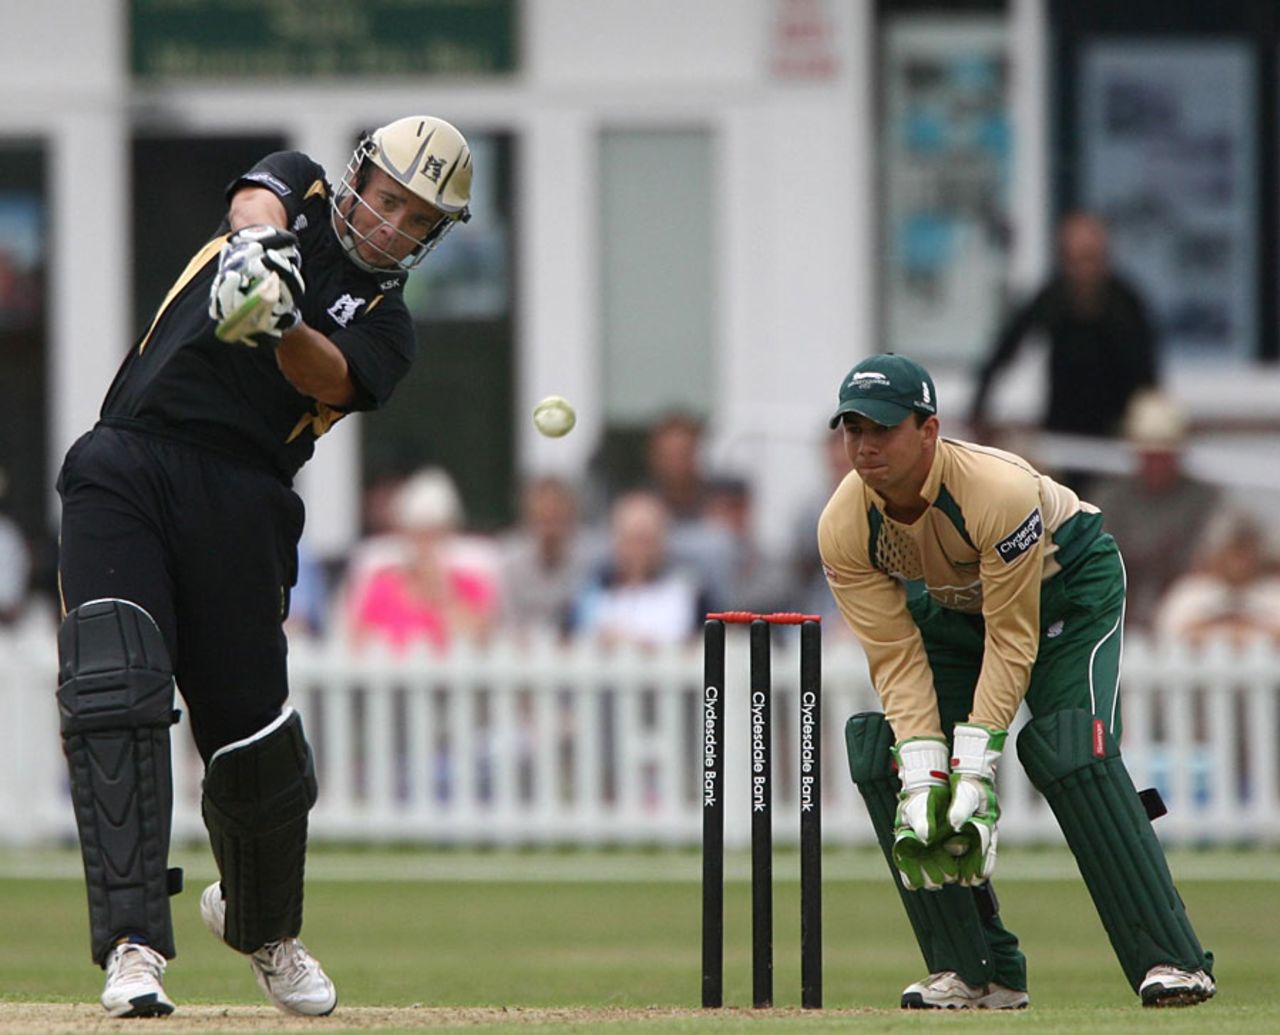 Neil Carter smashes a boundary to bring up his century, Leicestershire v Warwickshire, Clydesdale Bank 40, Leicester, July 25, 2010